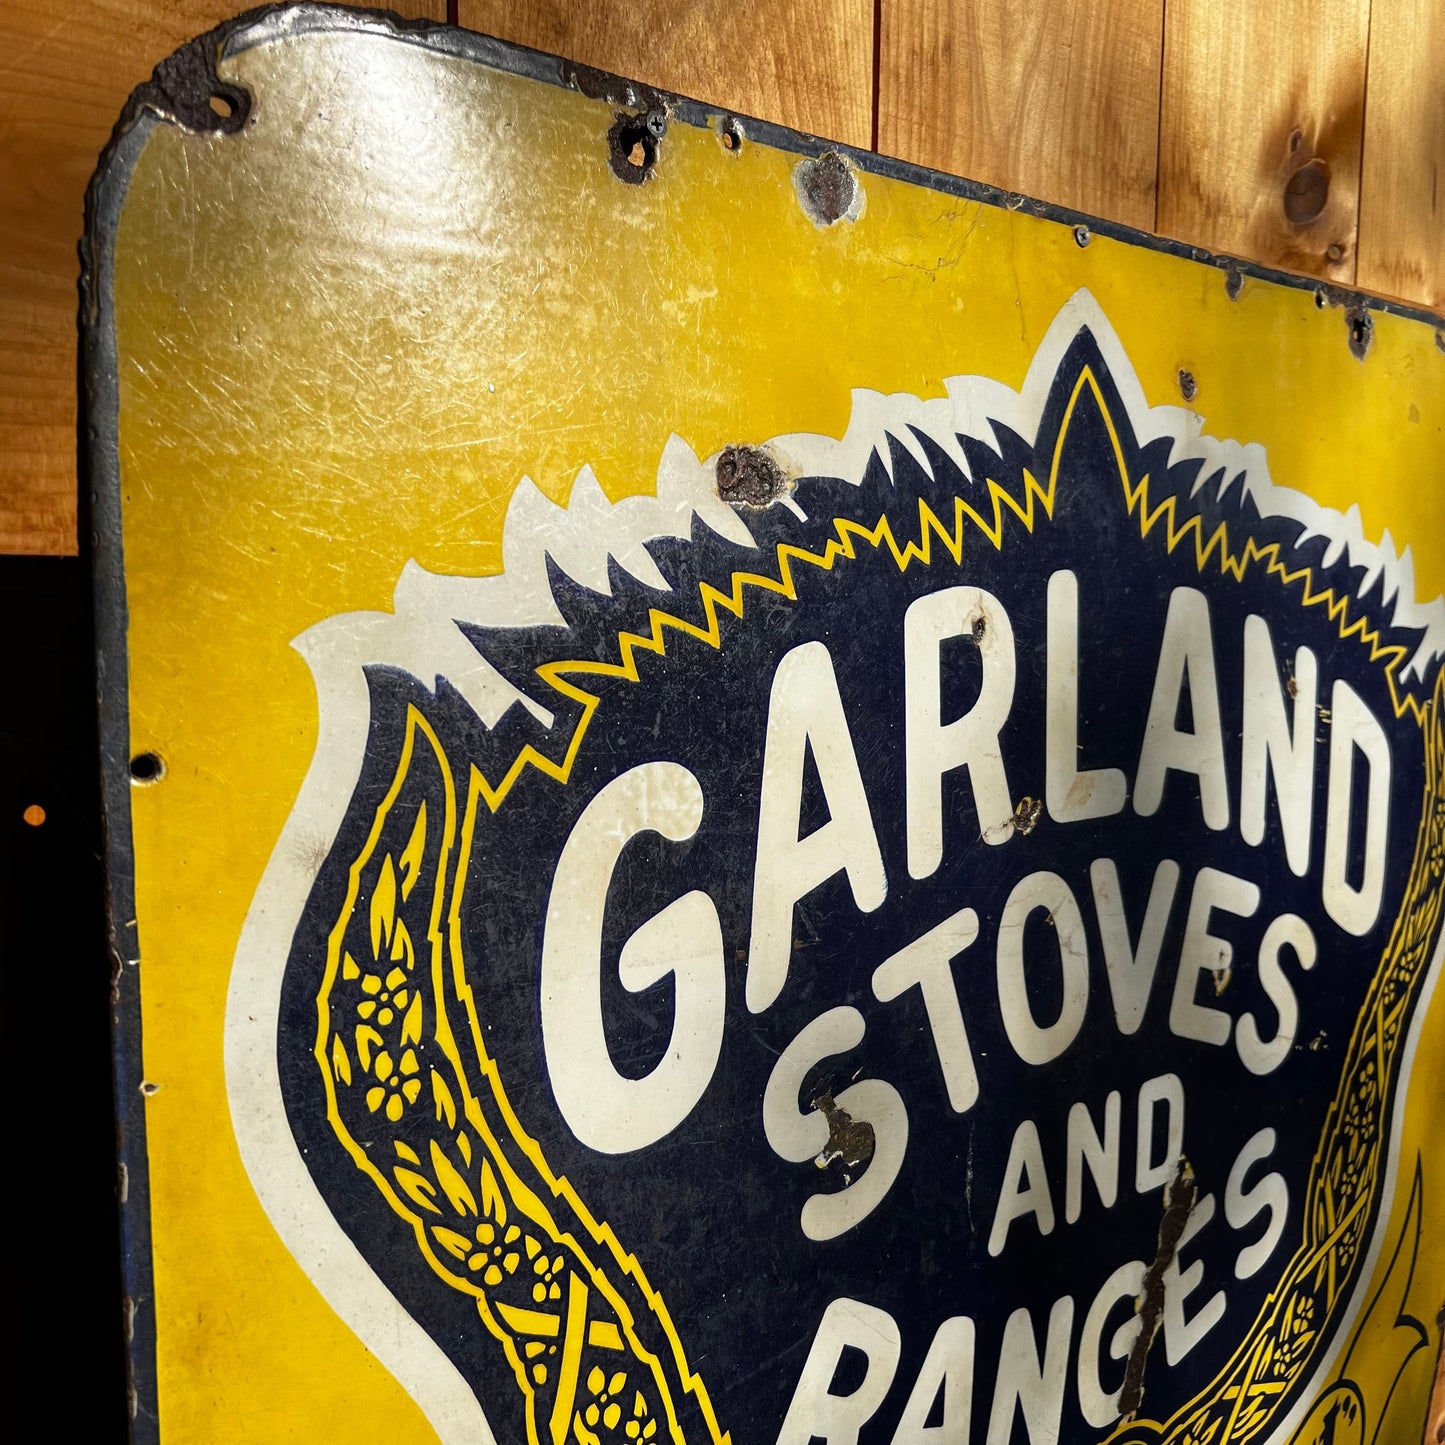 Rare Garland Stoves and Ranges Sign SSP 38” x 38” Porcelain Vintage Advertising The World’s Best Parlor Stove